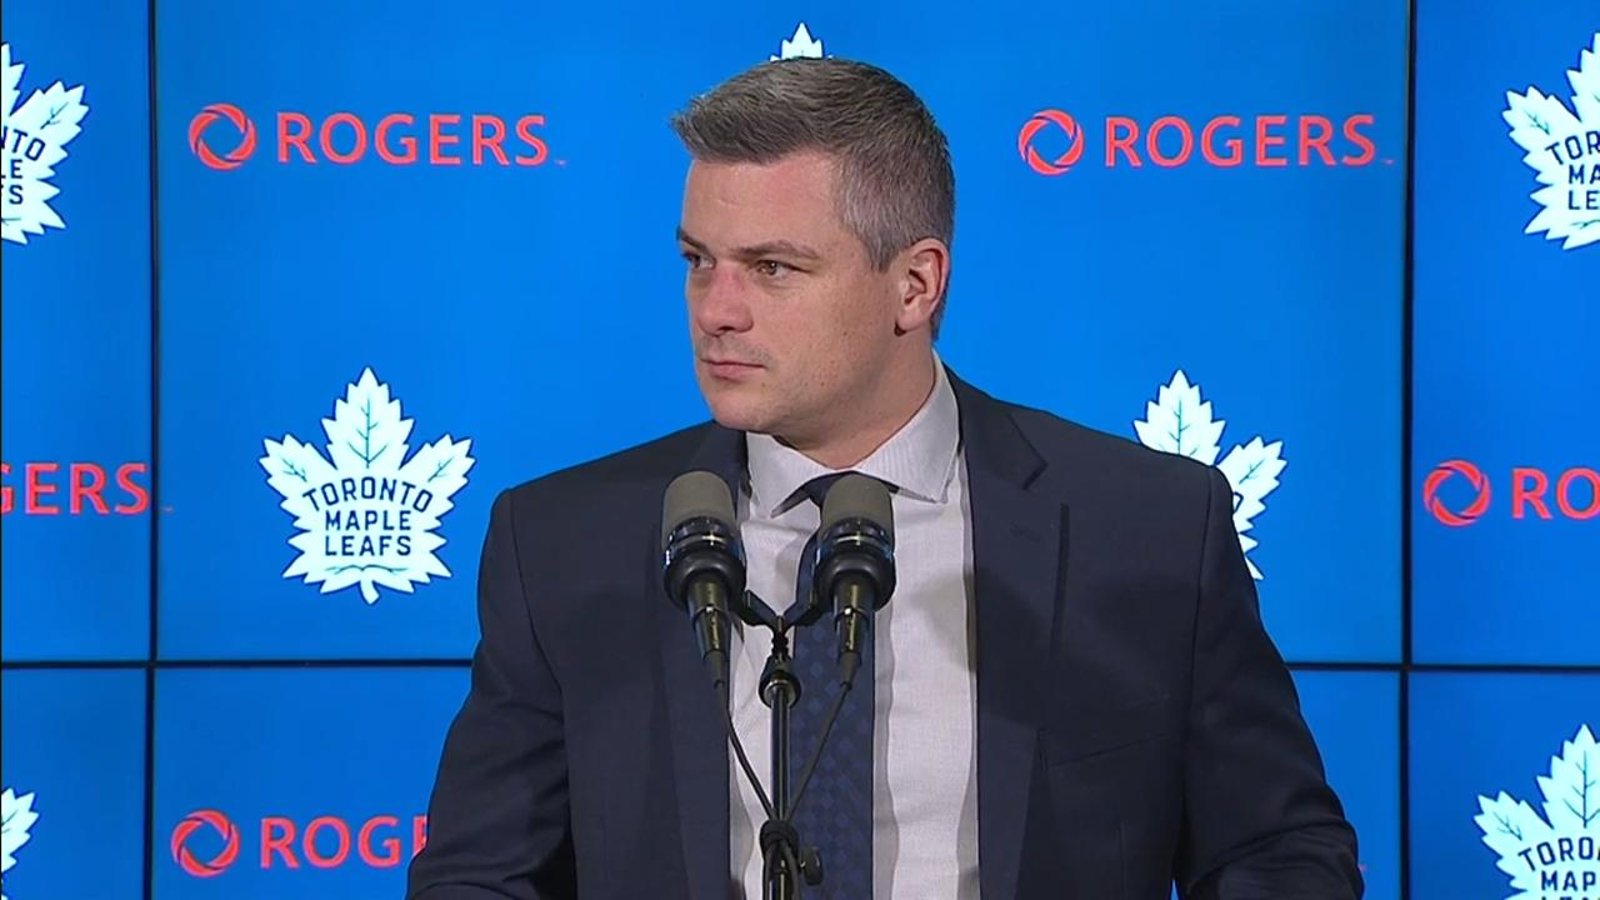 Leafs head coach Keefe crushes the hopes of fans after strong start